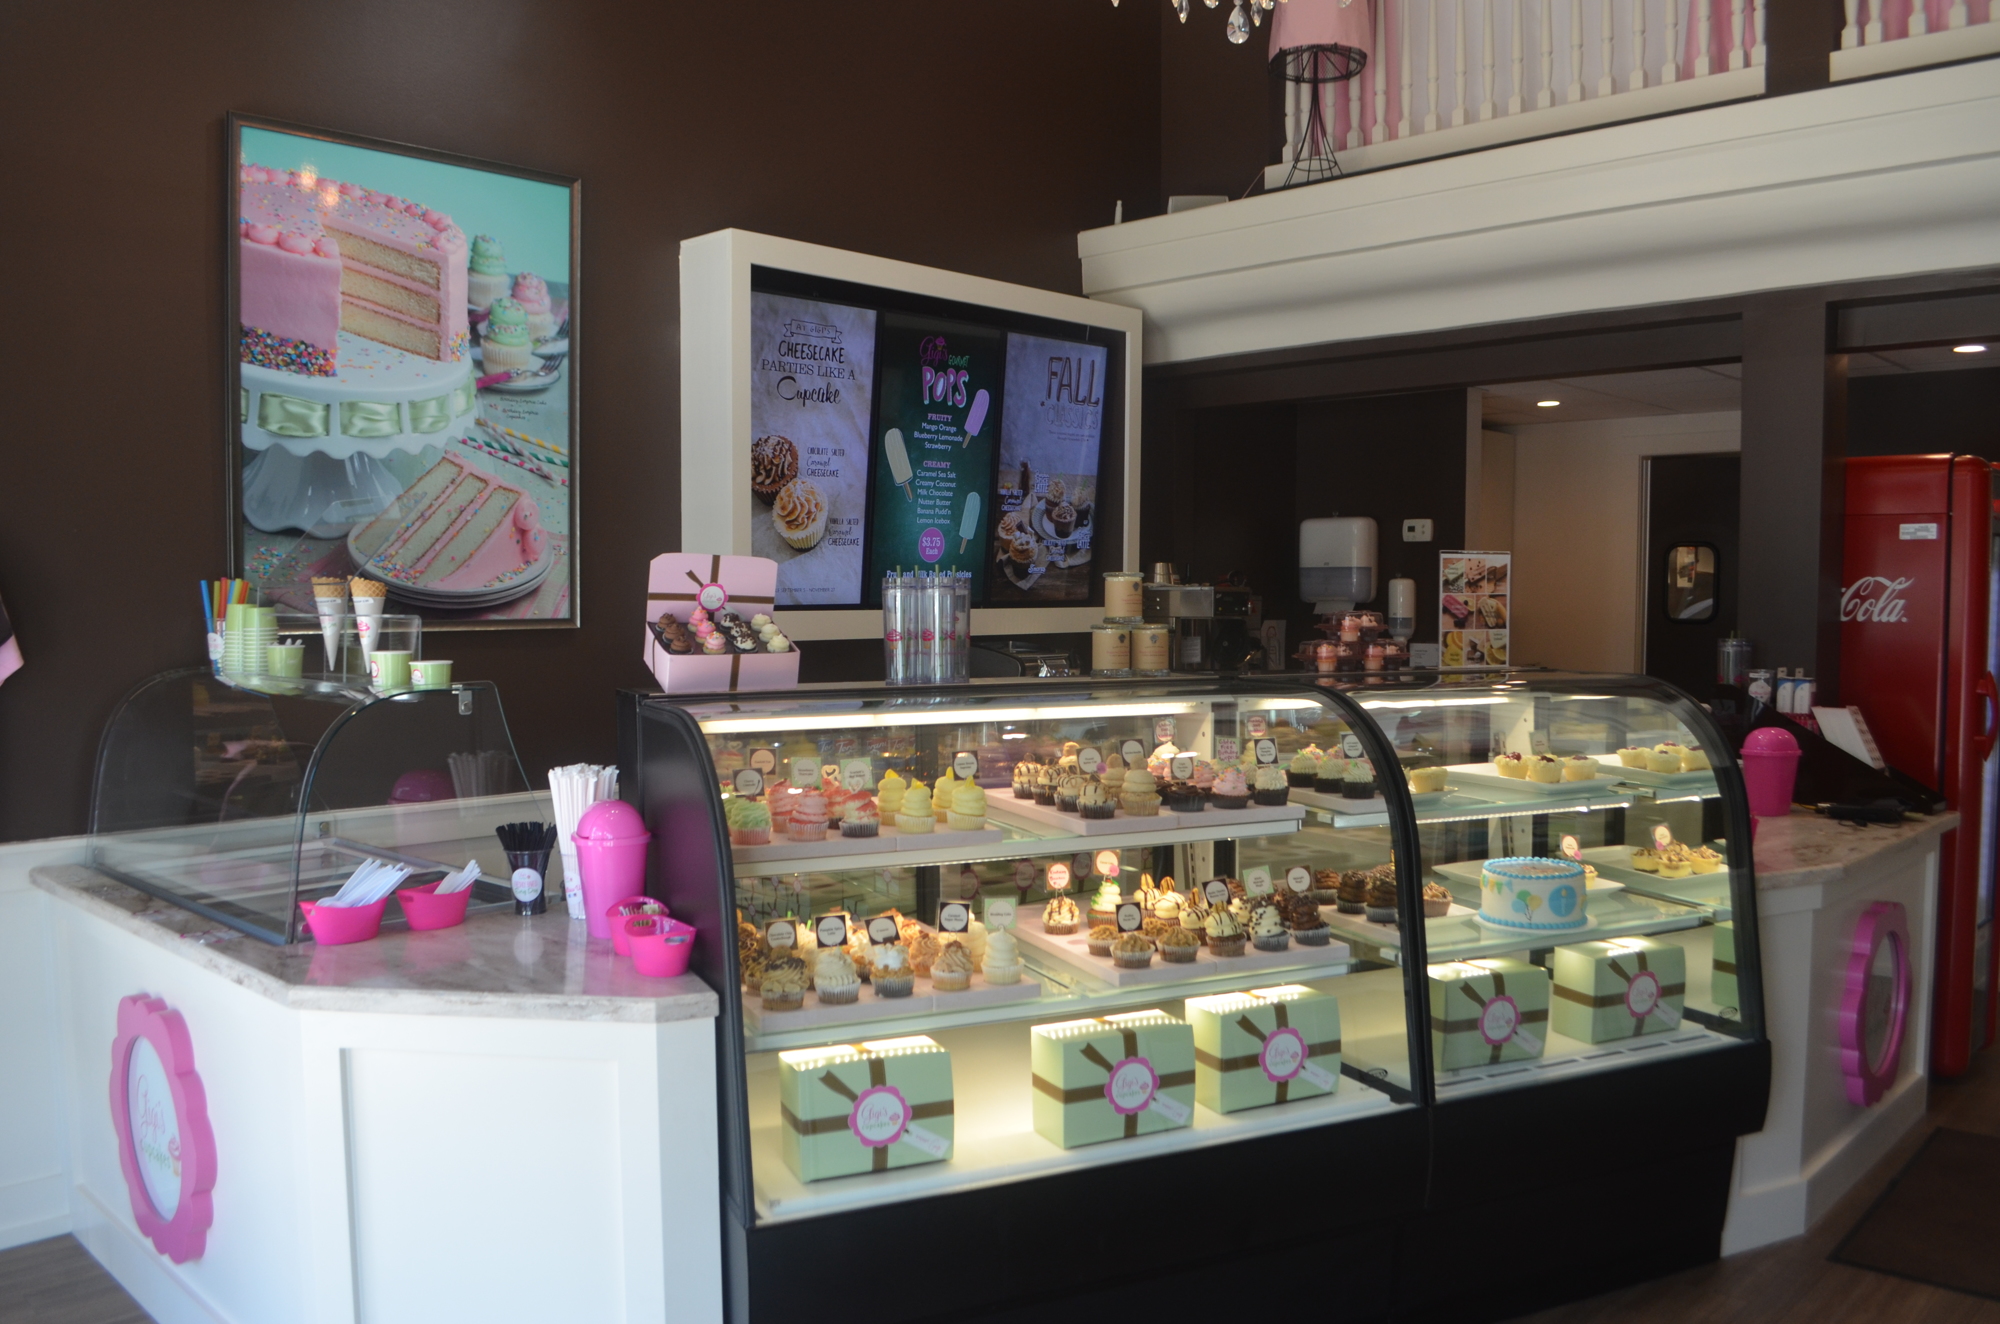 Gigi's Cupcakes opened just in time for summer. Now the store is getting ready for fall with pumpkin-themed treats.